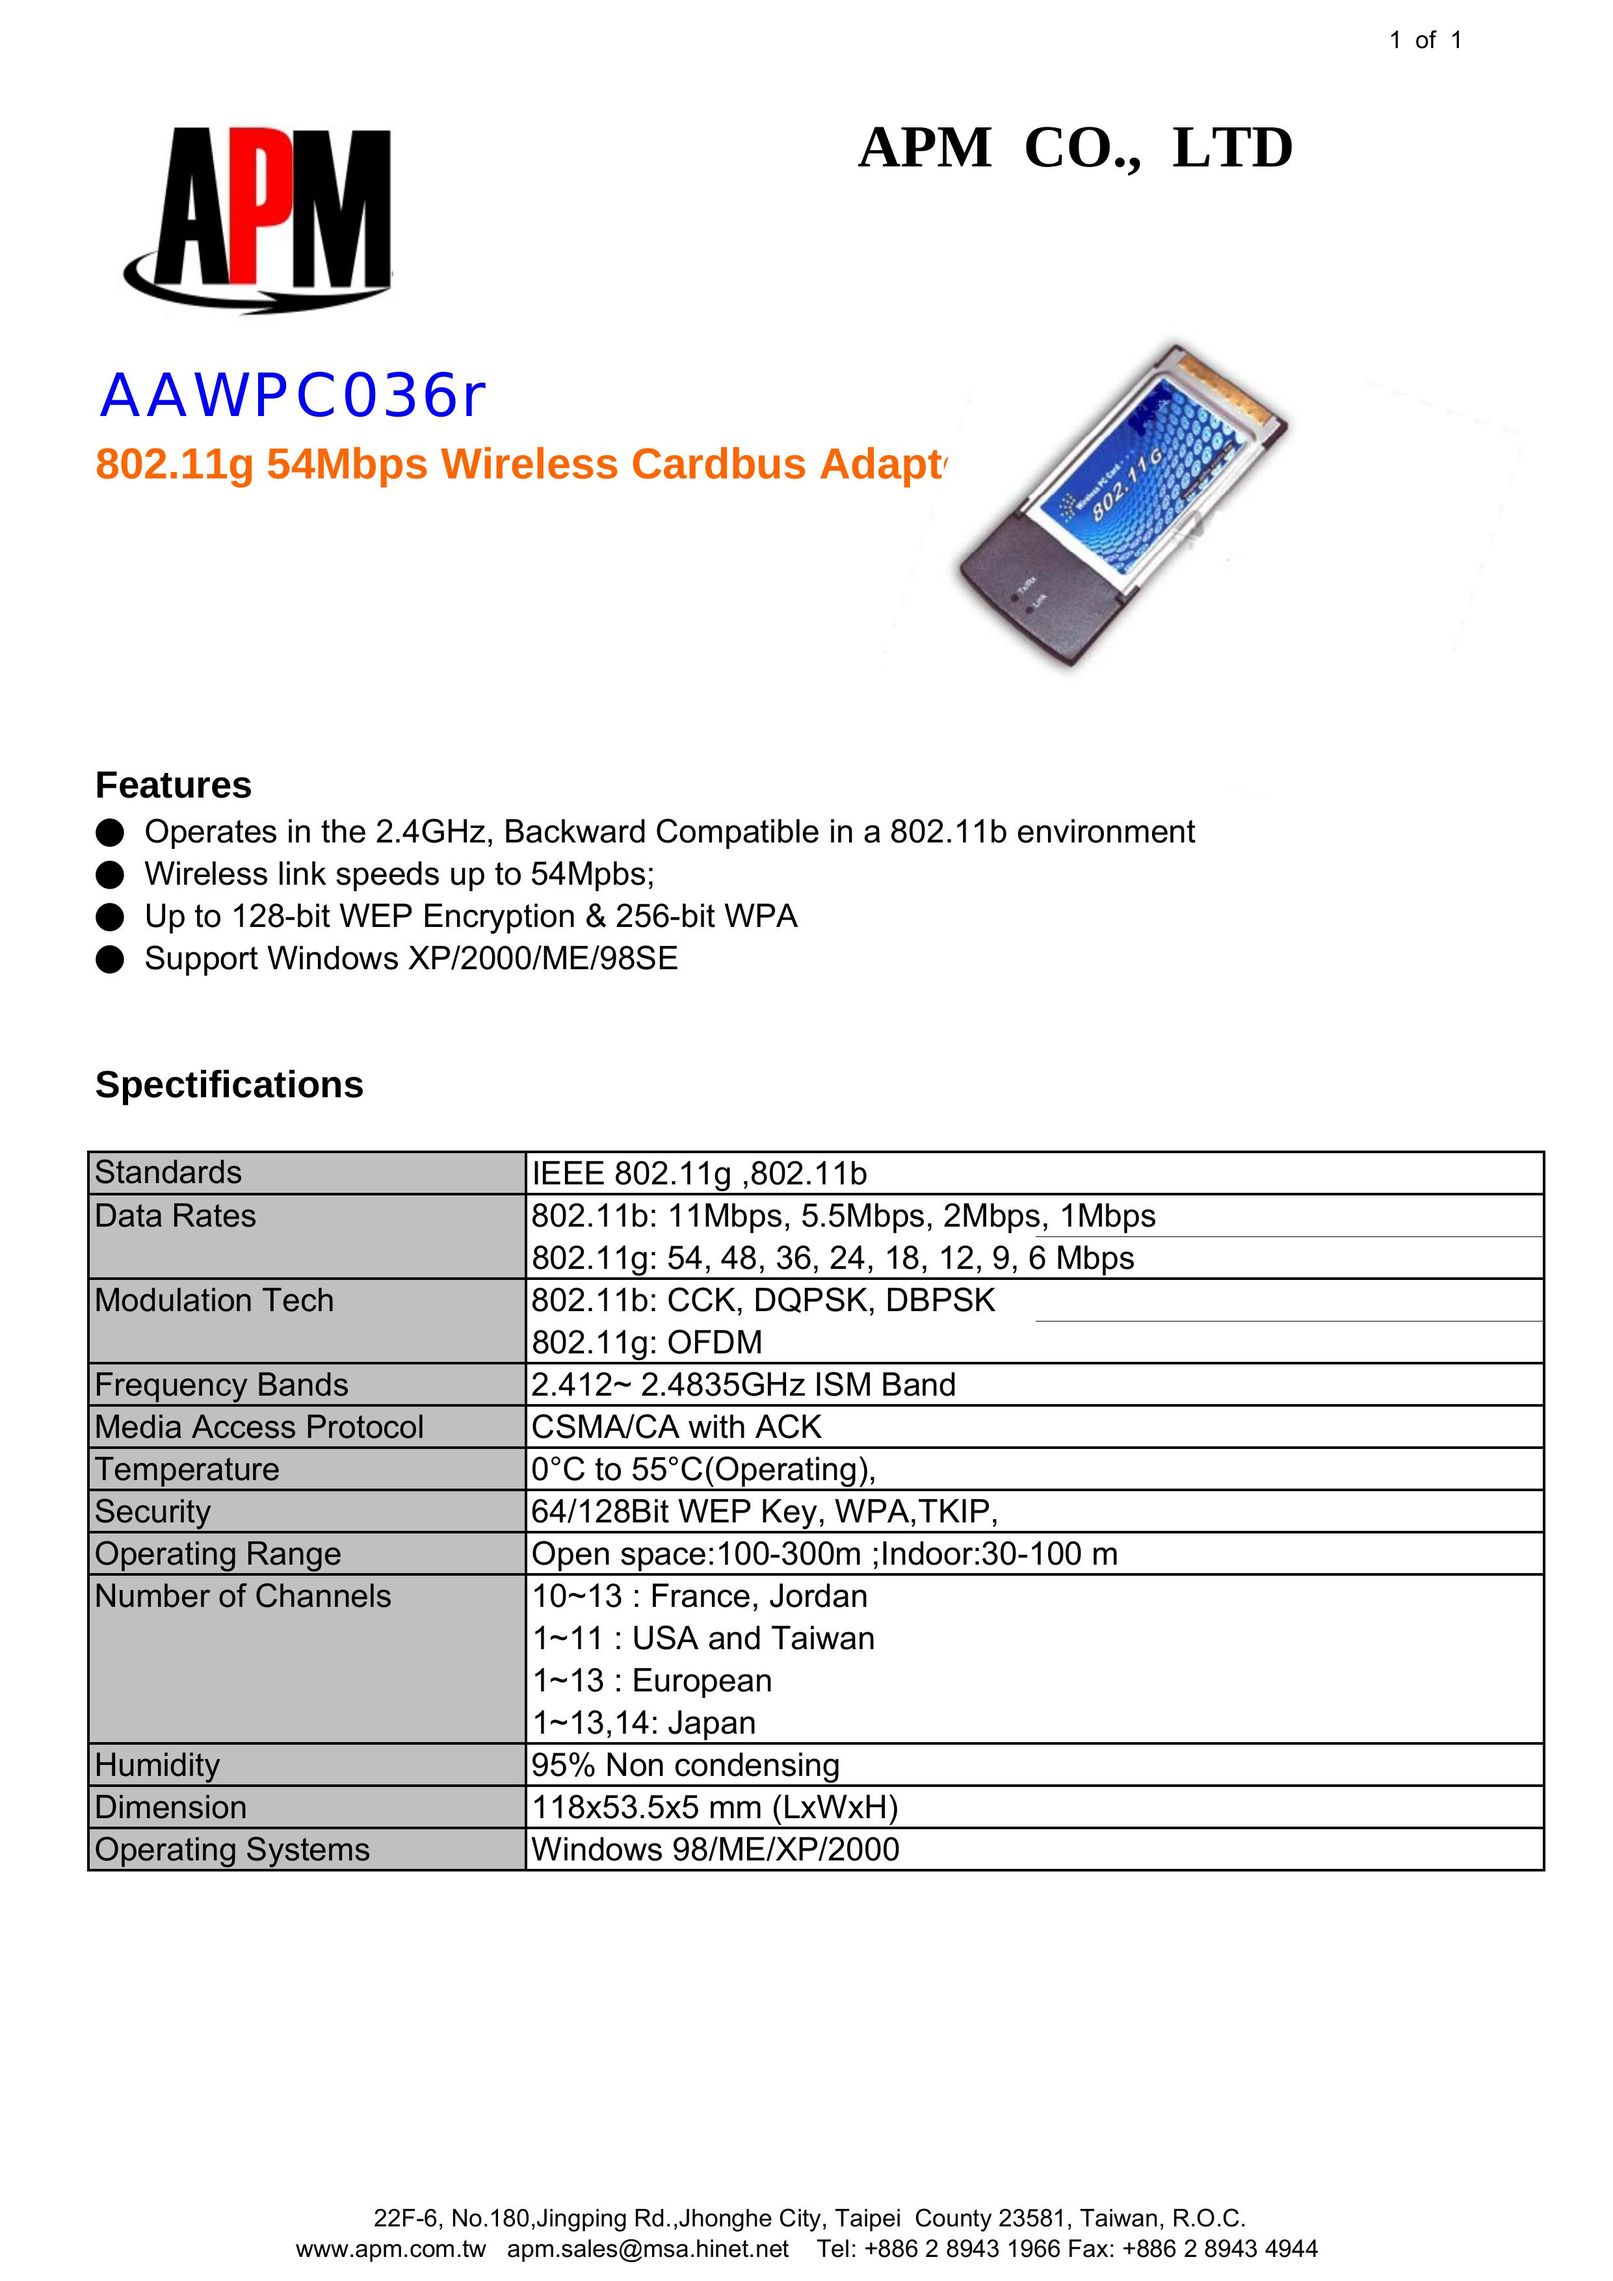 APM AAWPC036r Network Card User Manual